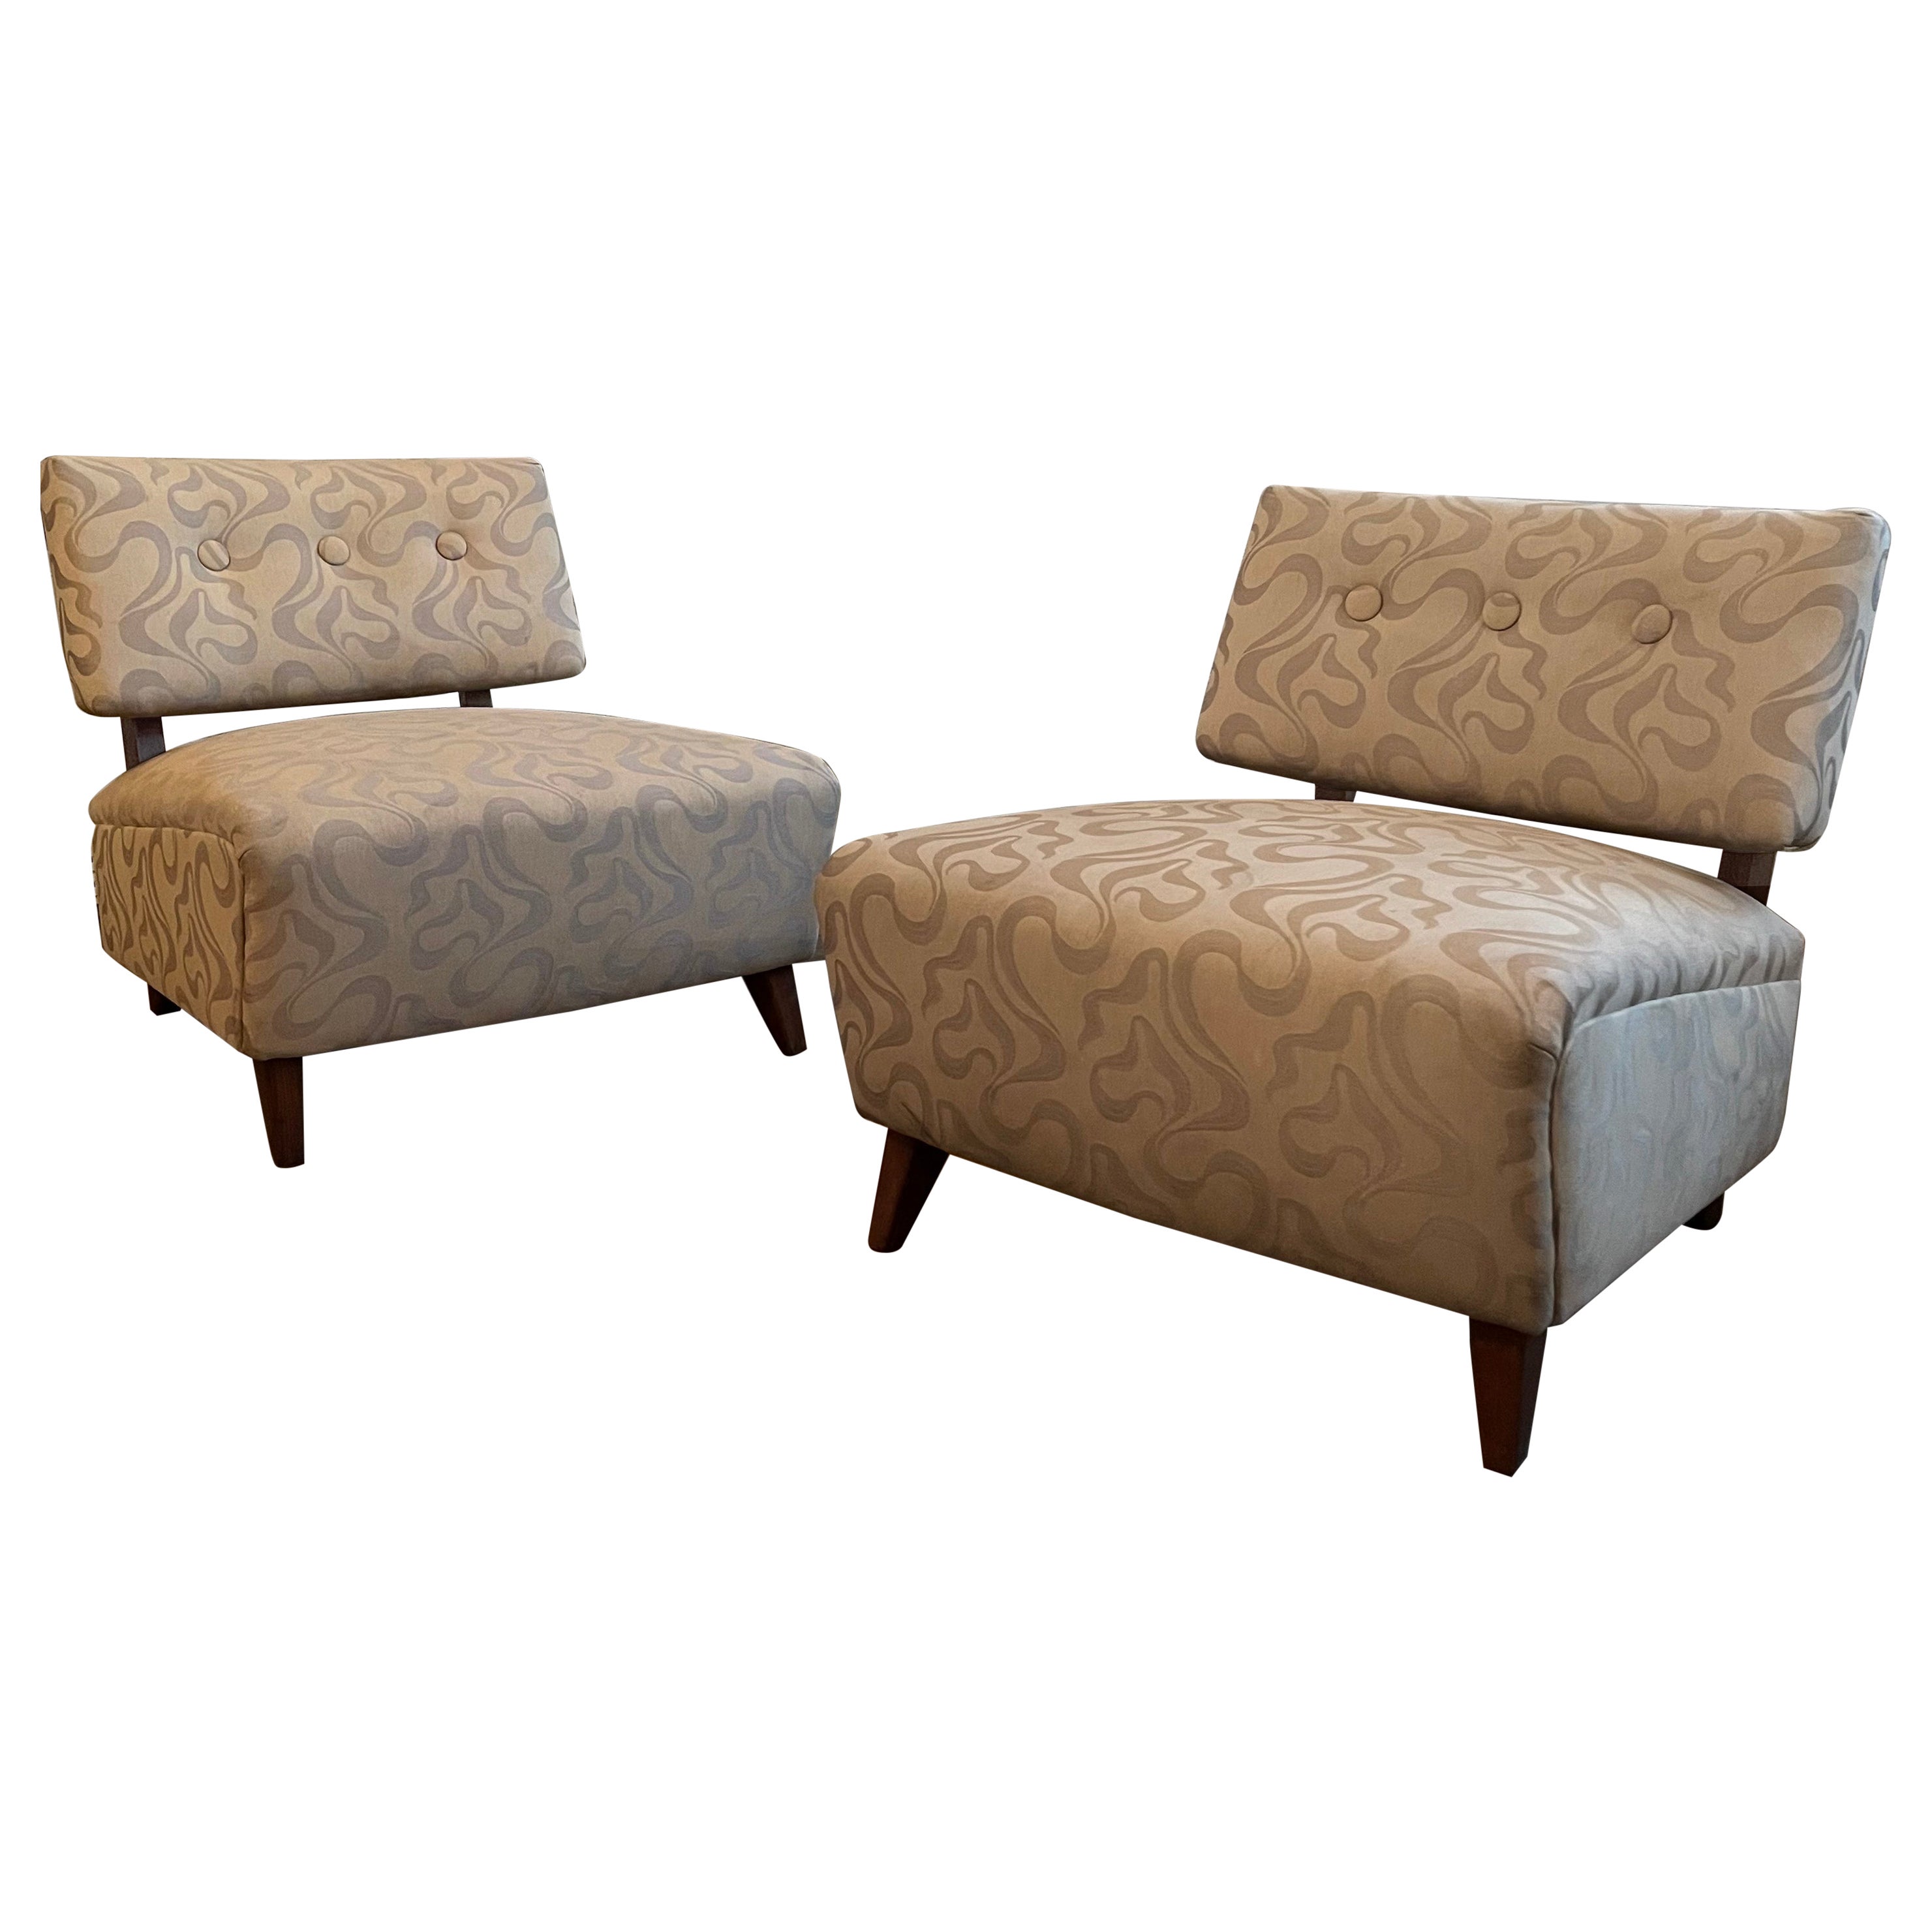 Hollywood Regency Slipper Chairs in the Style of Billy Haines